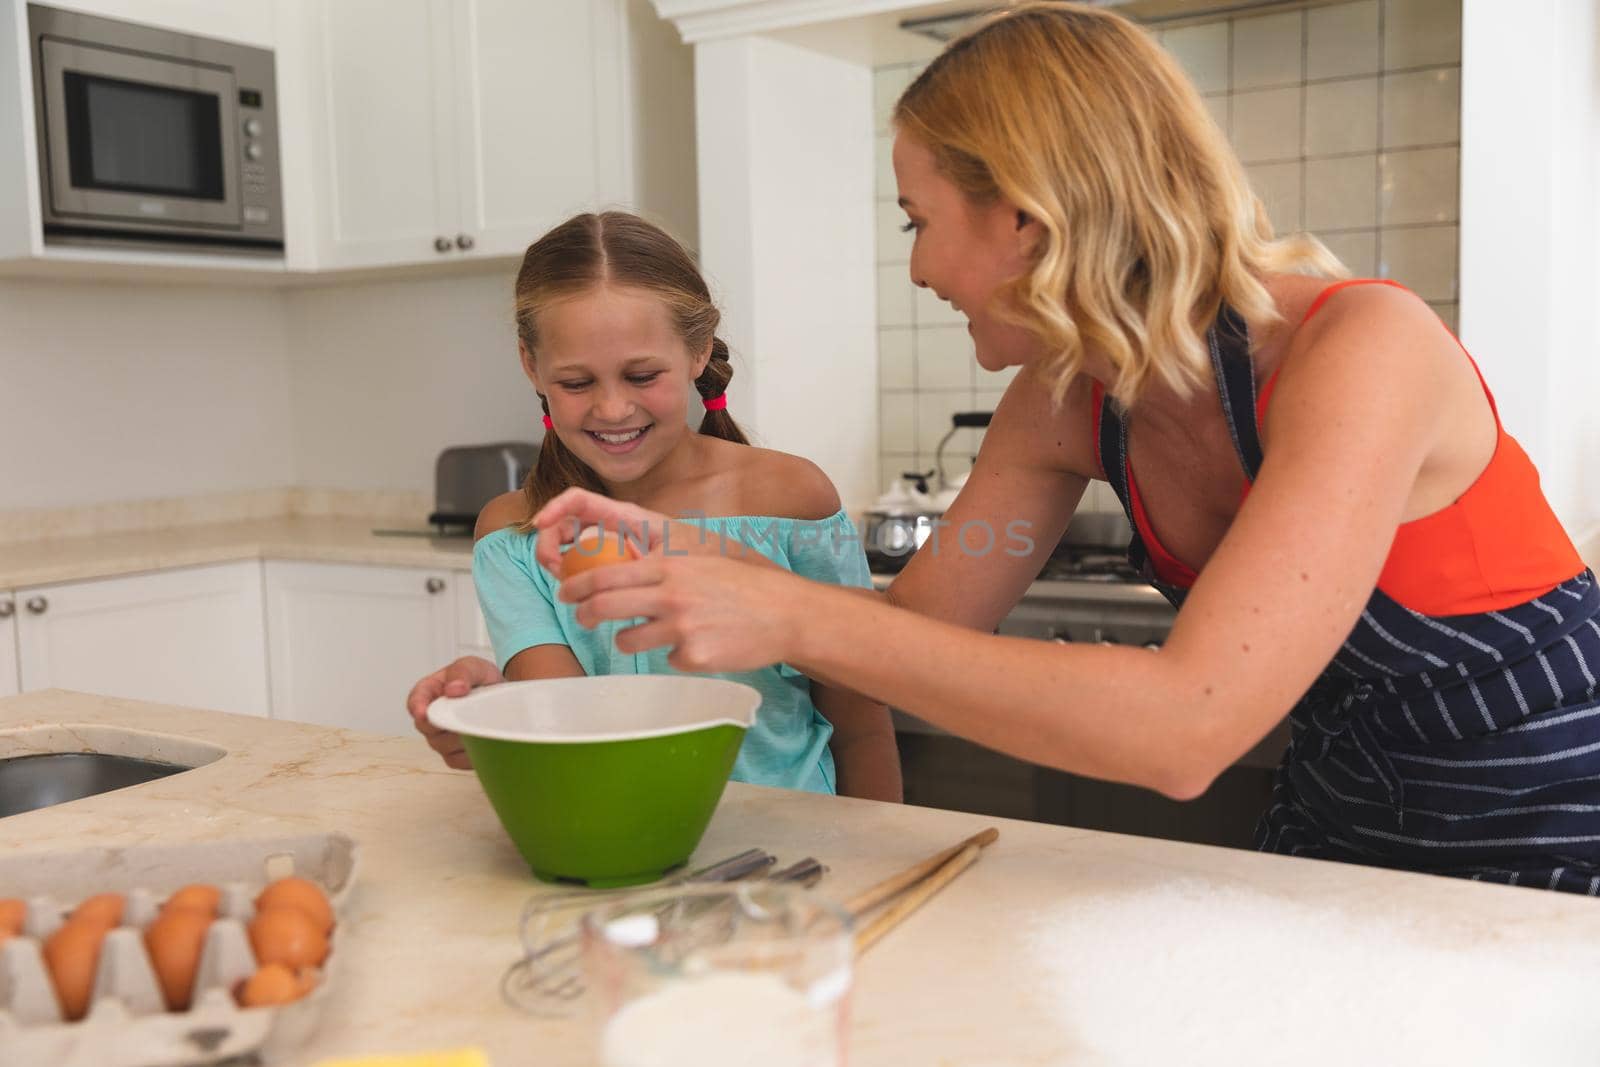 Caucasian mother and daughter baking and smiling in kitchen by Wavebreakmedia